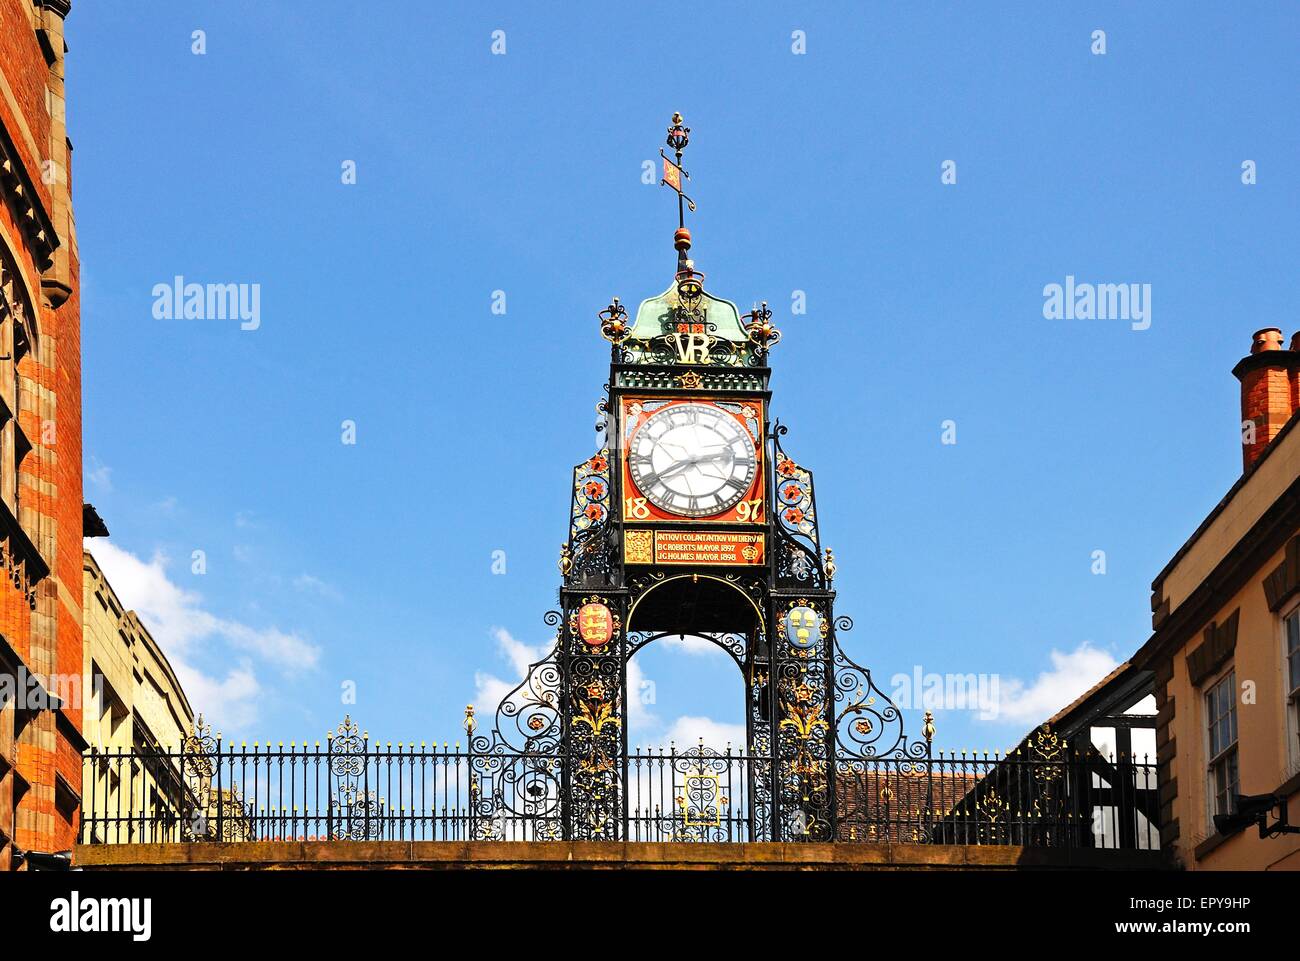 Eastgate Clock which was erected in 1899 to celebrate the diamond jubilee of Queen Victoria, Chester, Cheshire, England, UK. Stock Photo